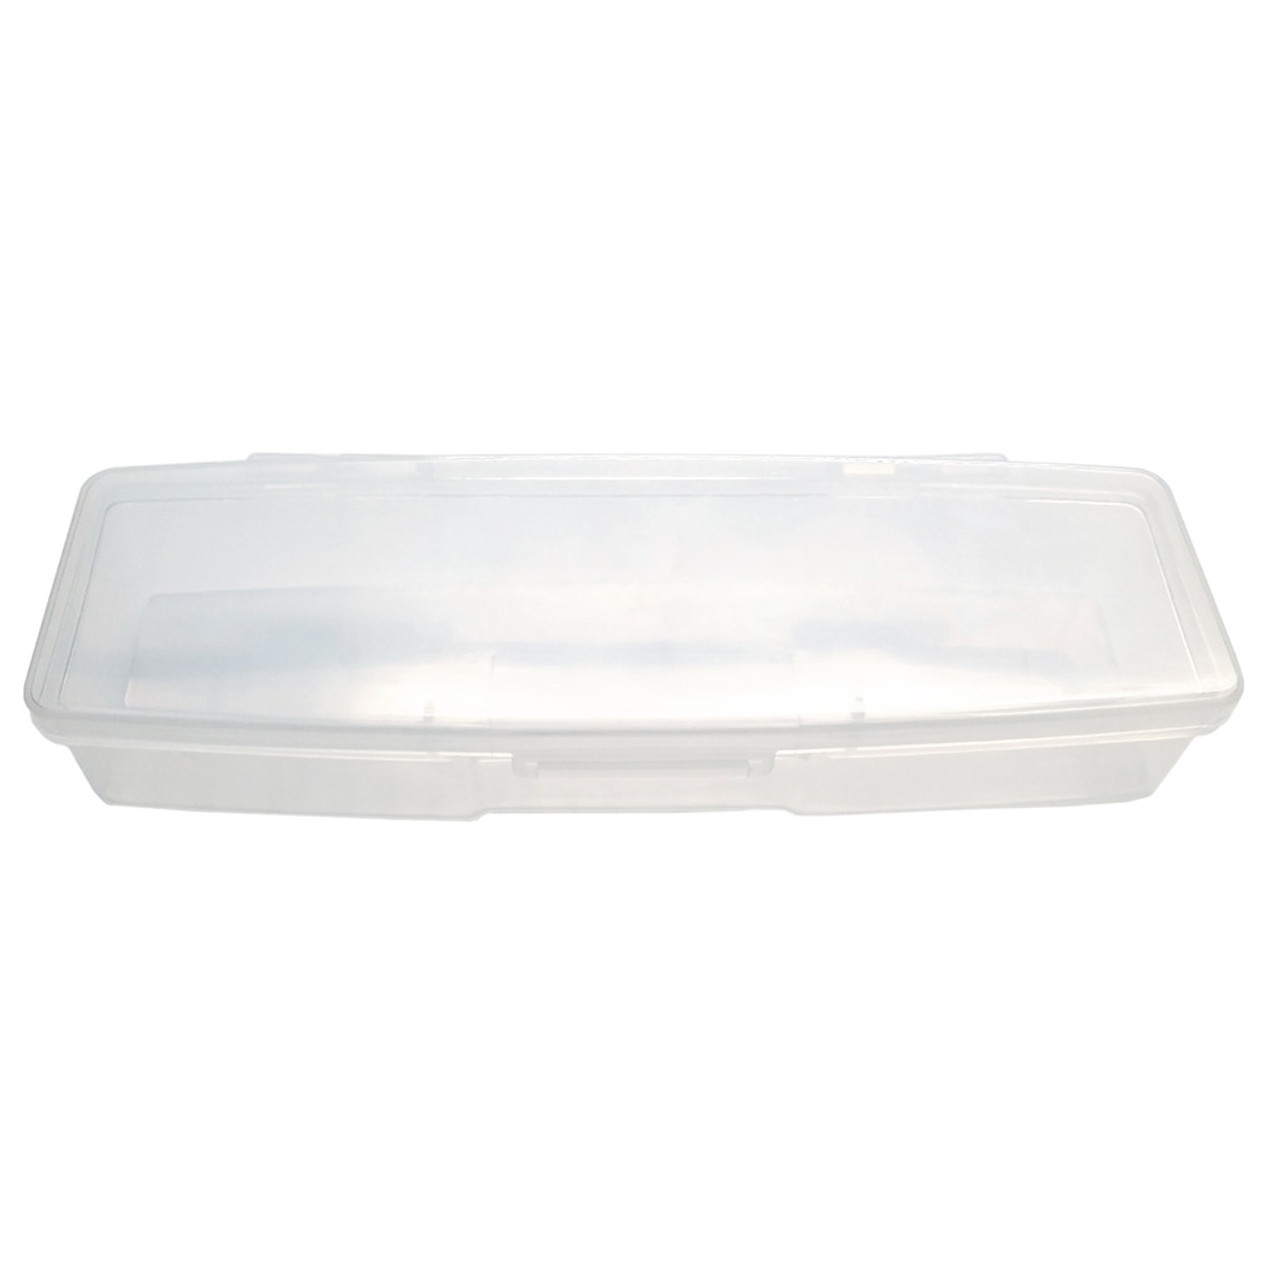 Buy Small Plastic Containers, Small Plastic Box Storage